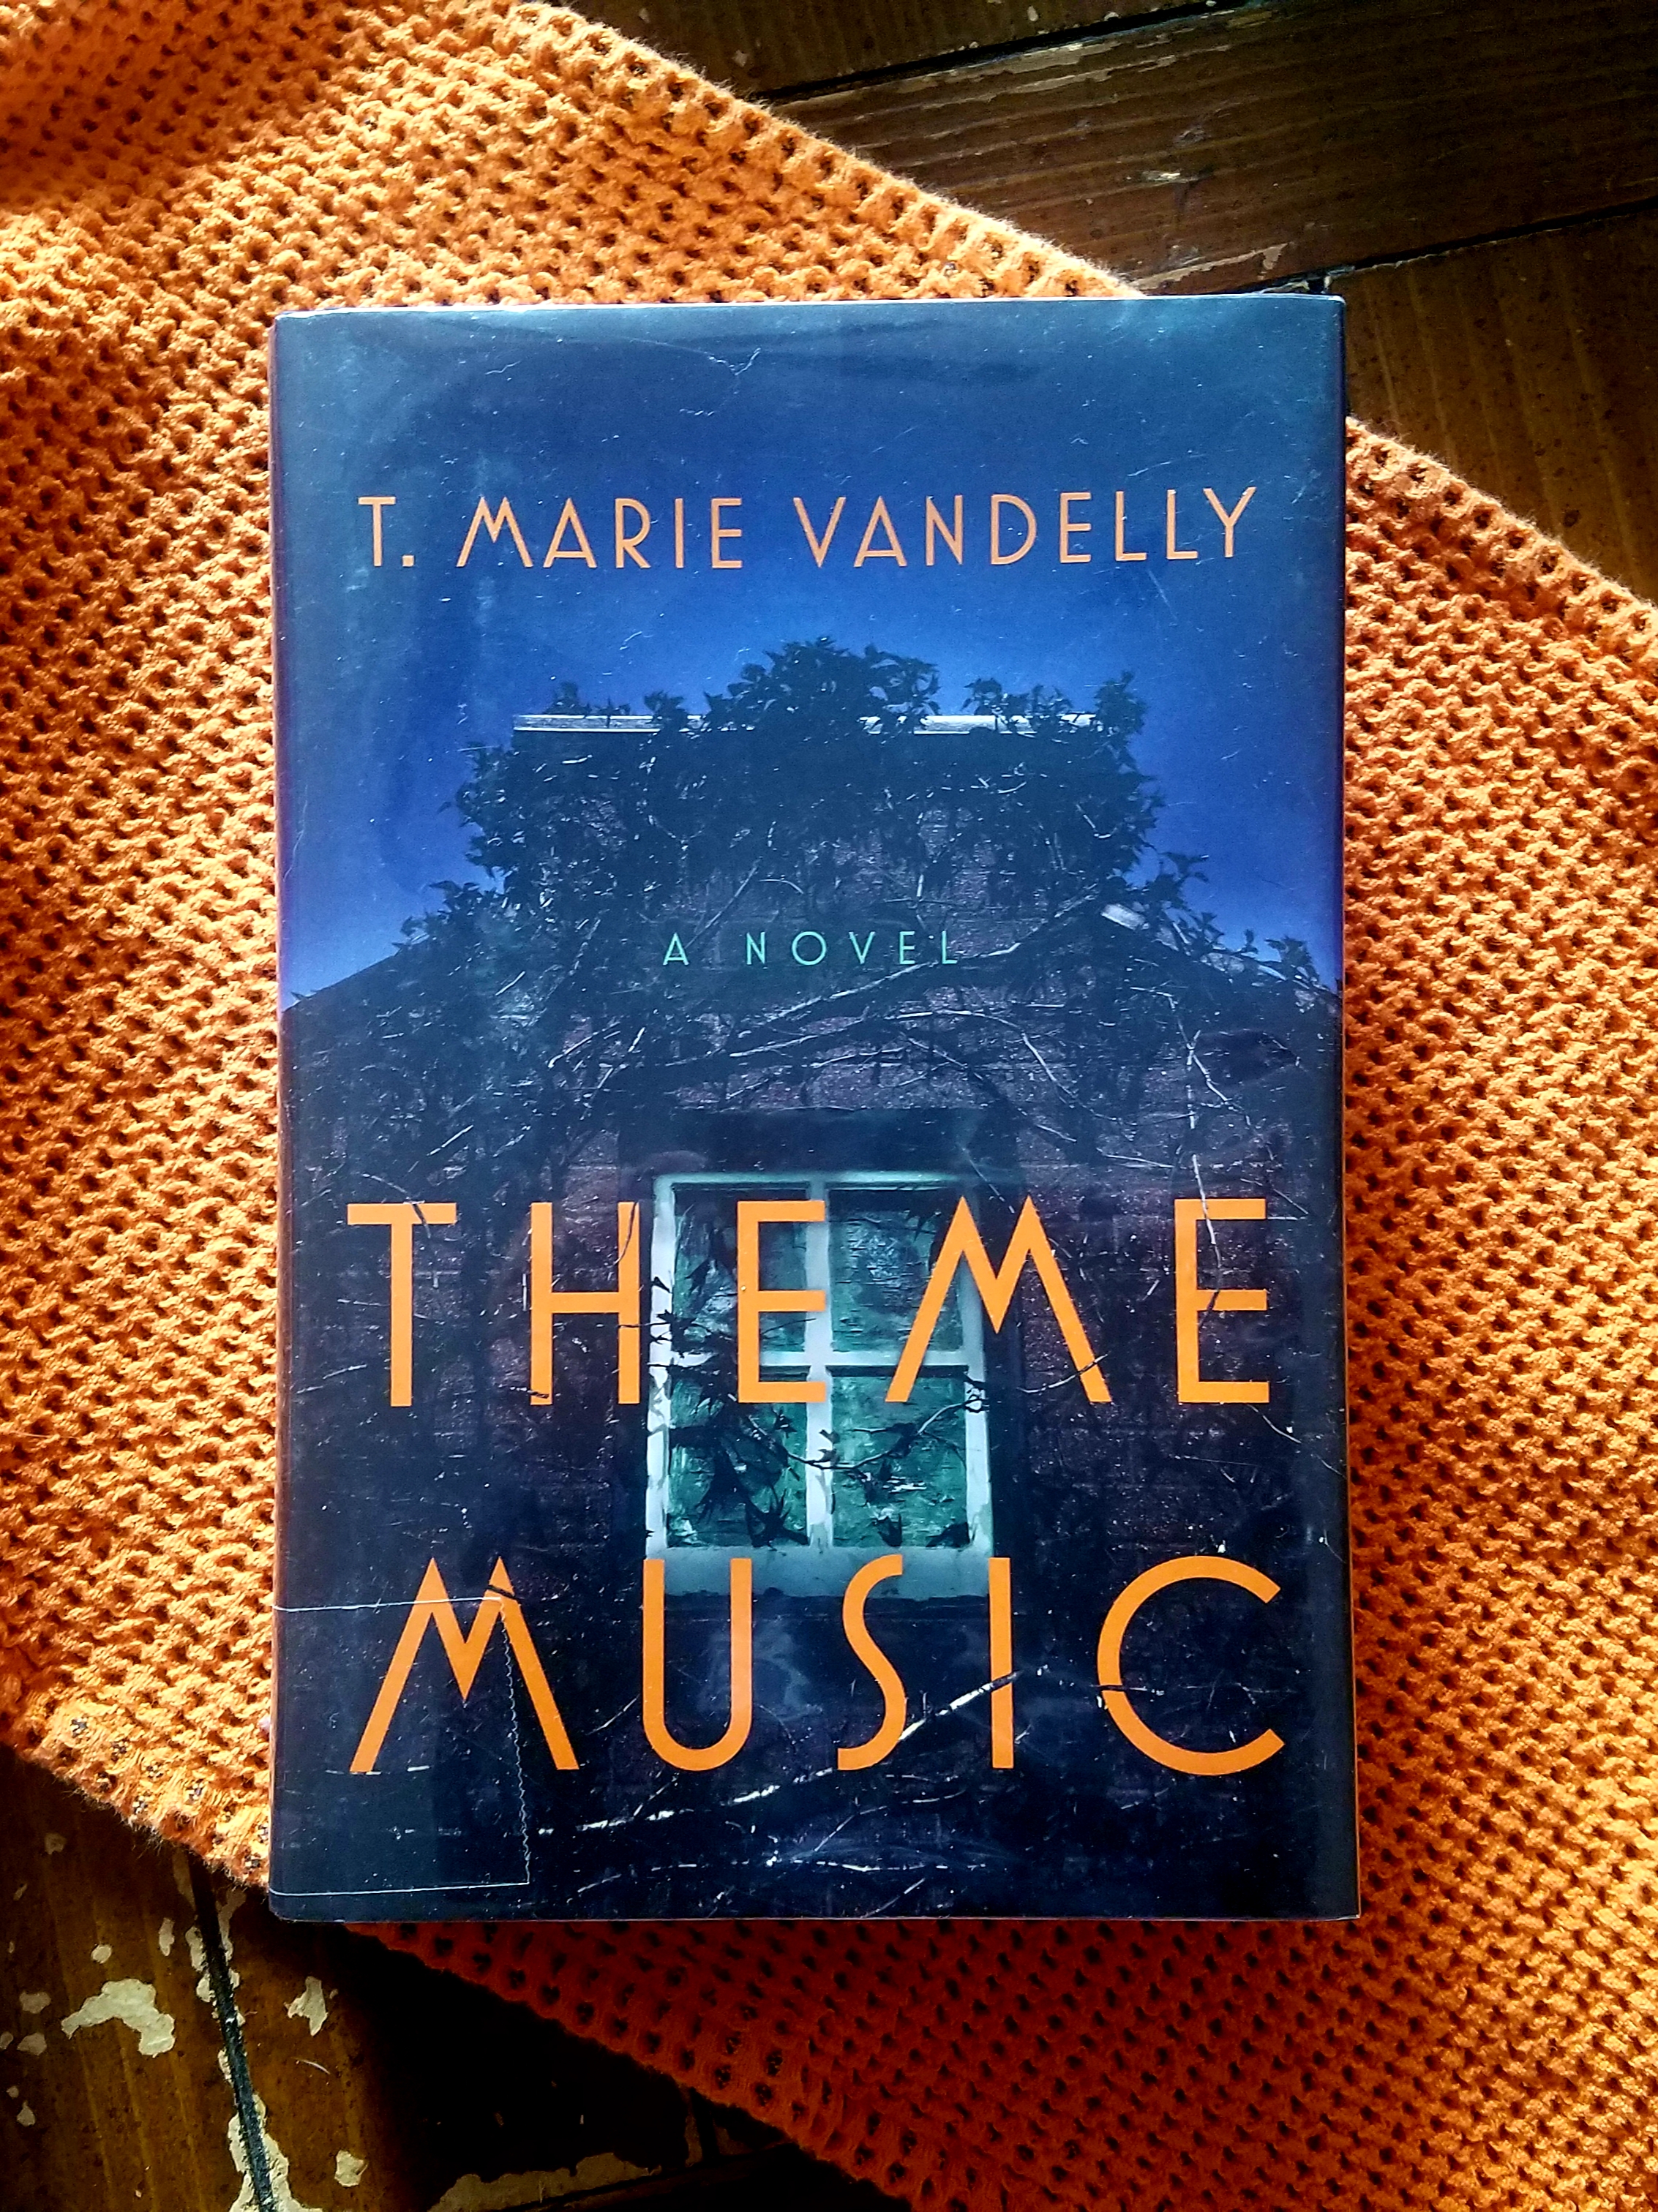 Book Review of THEME MUSIC